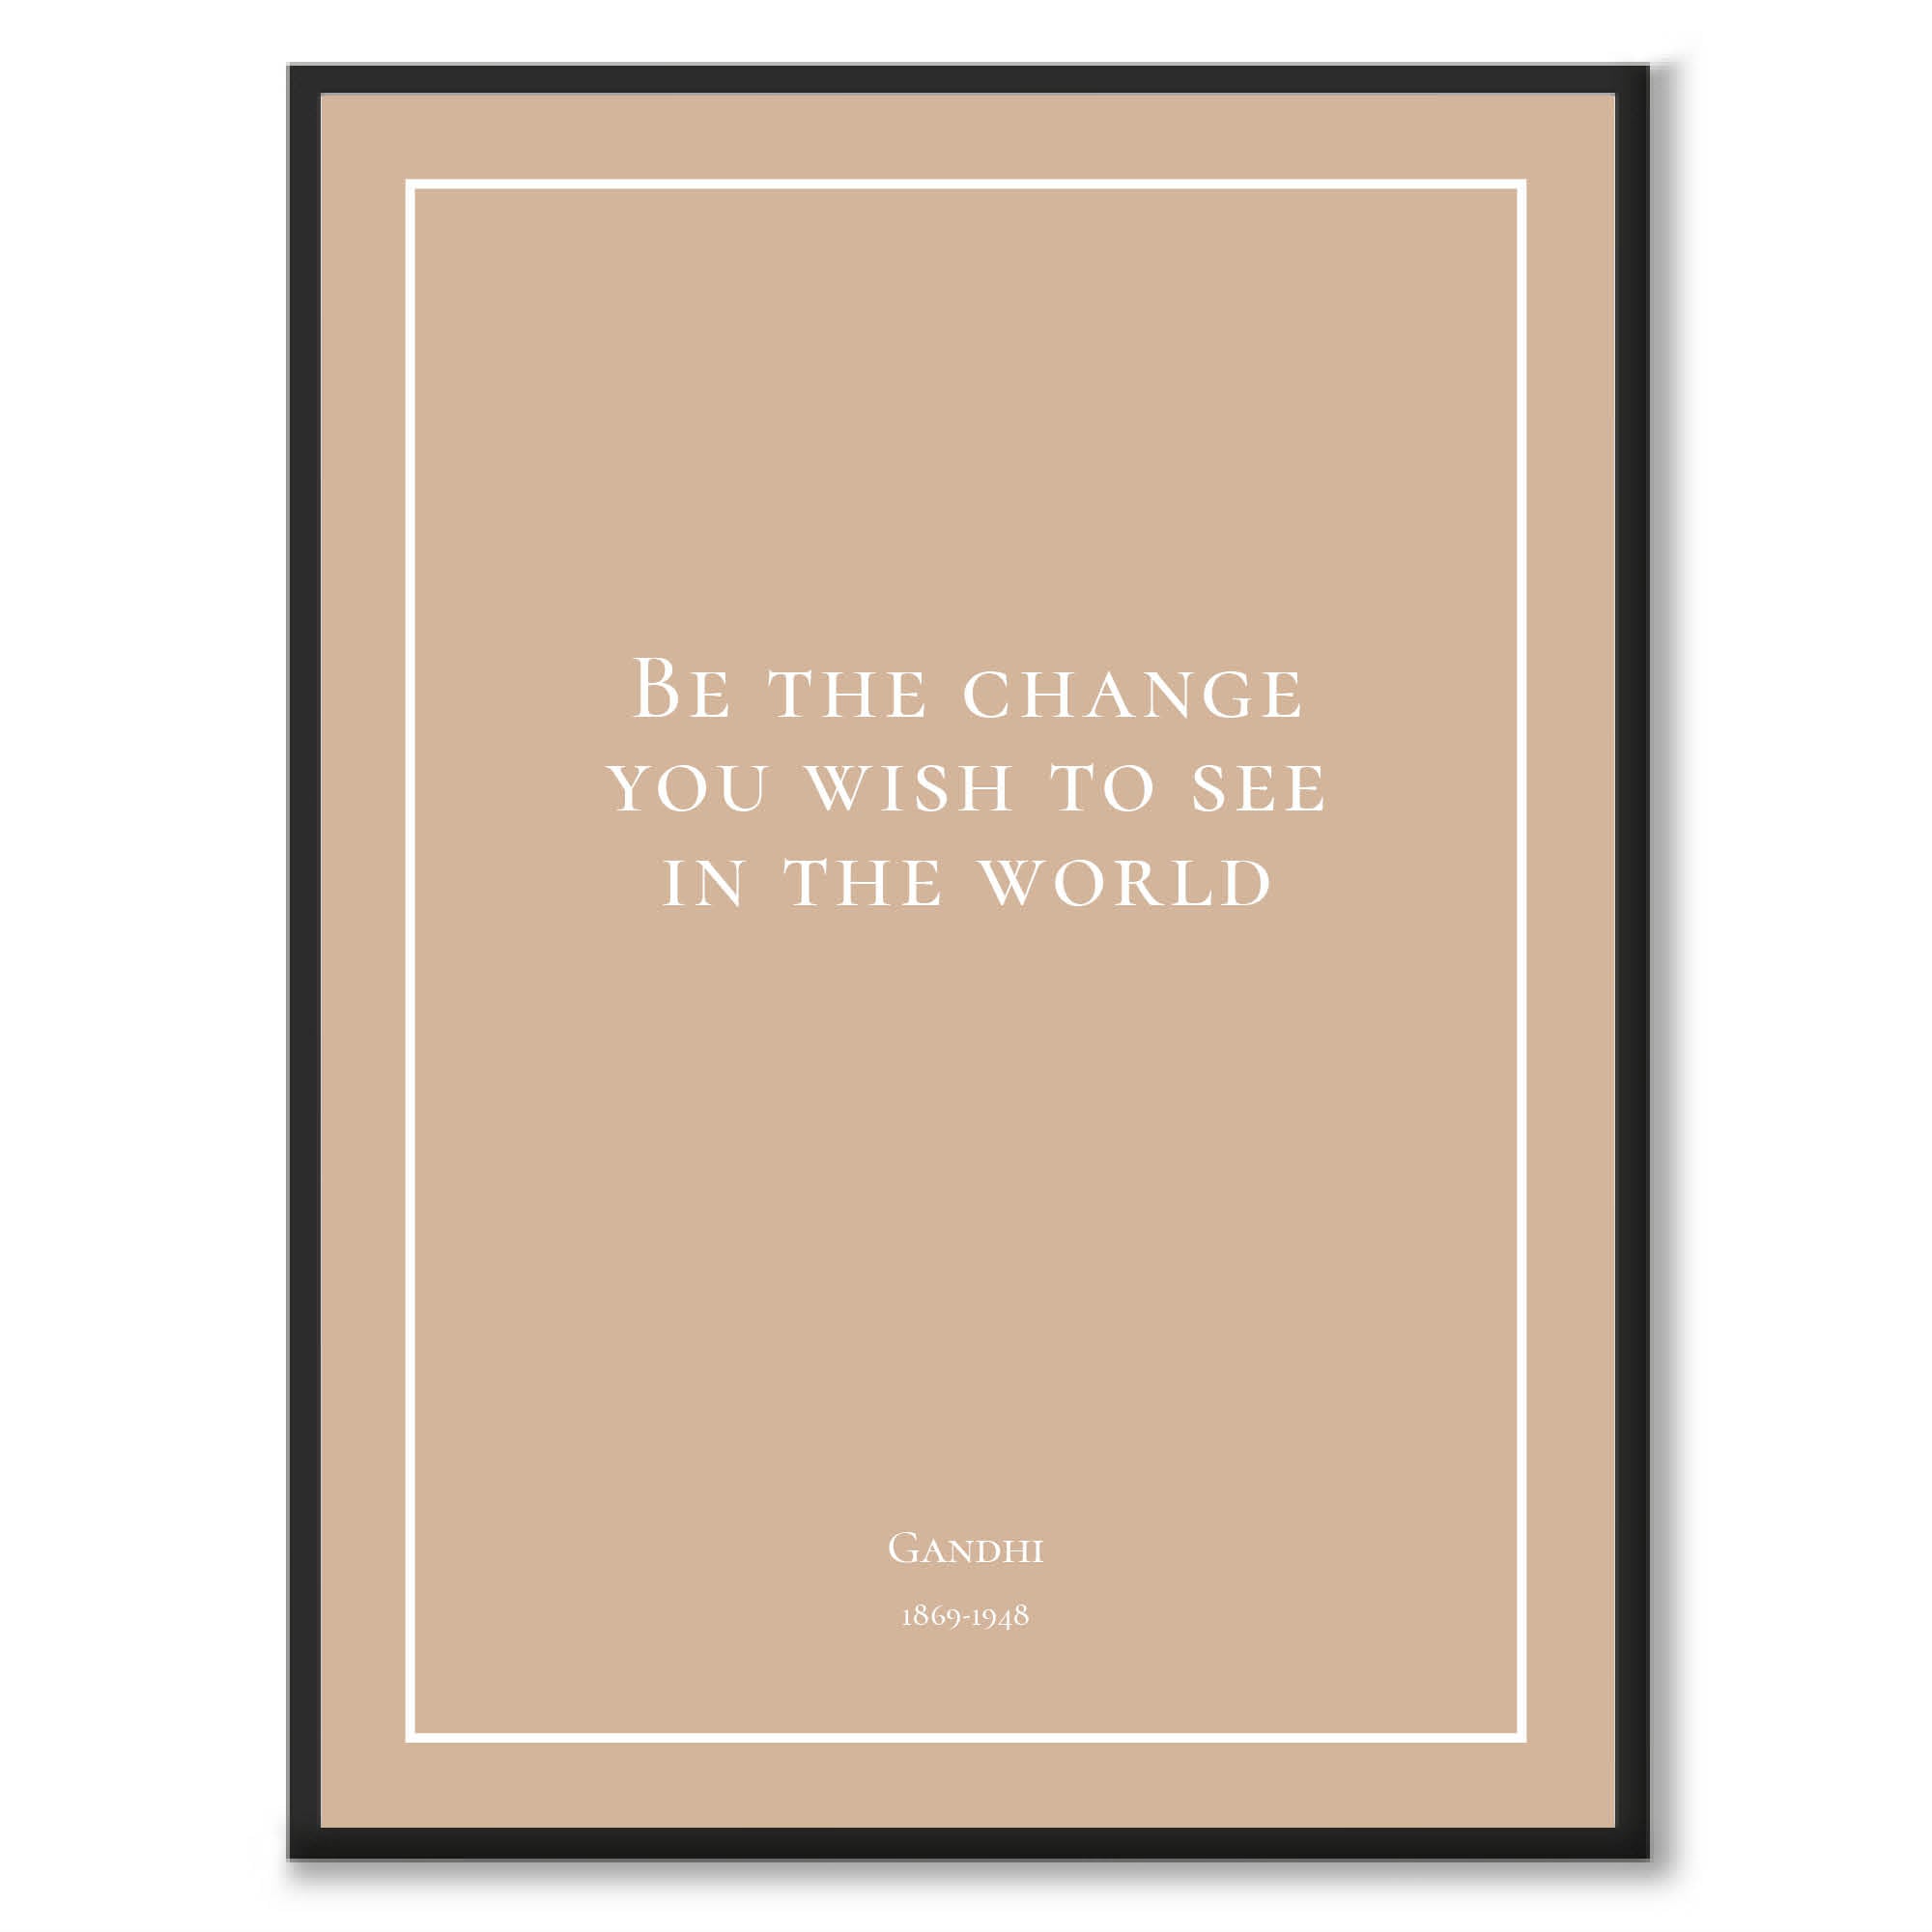 Gandhi - Be the change you wish to see in the world - Historly AB